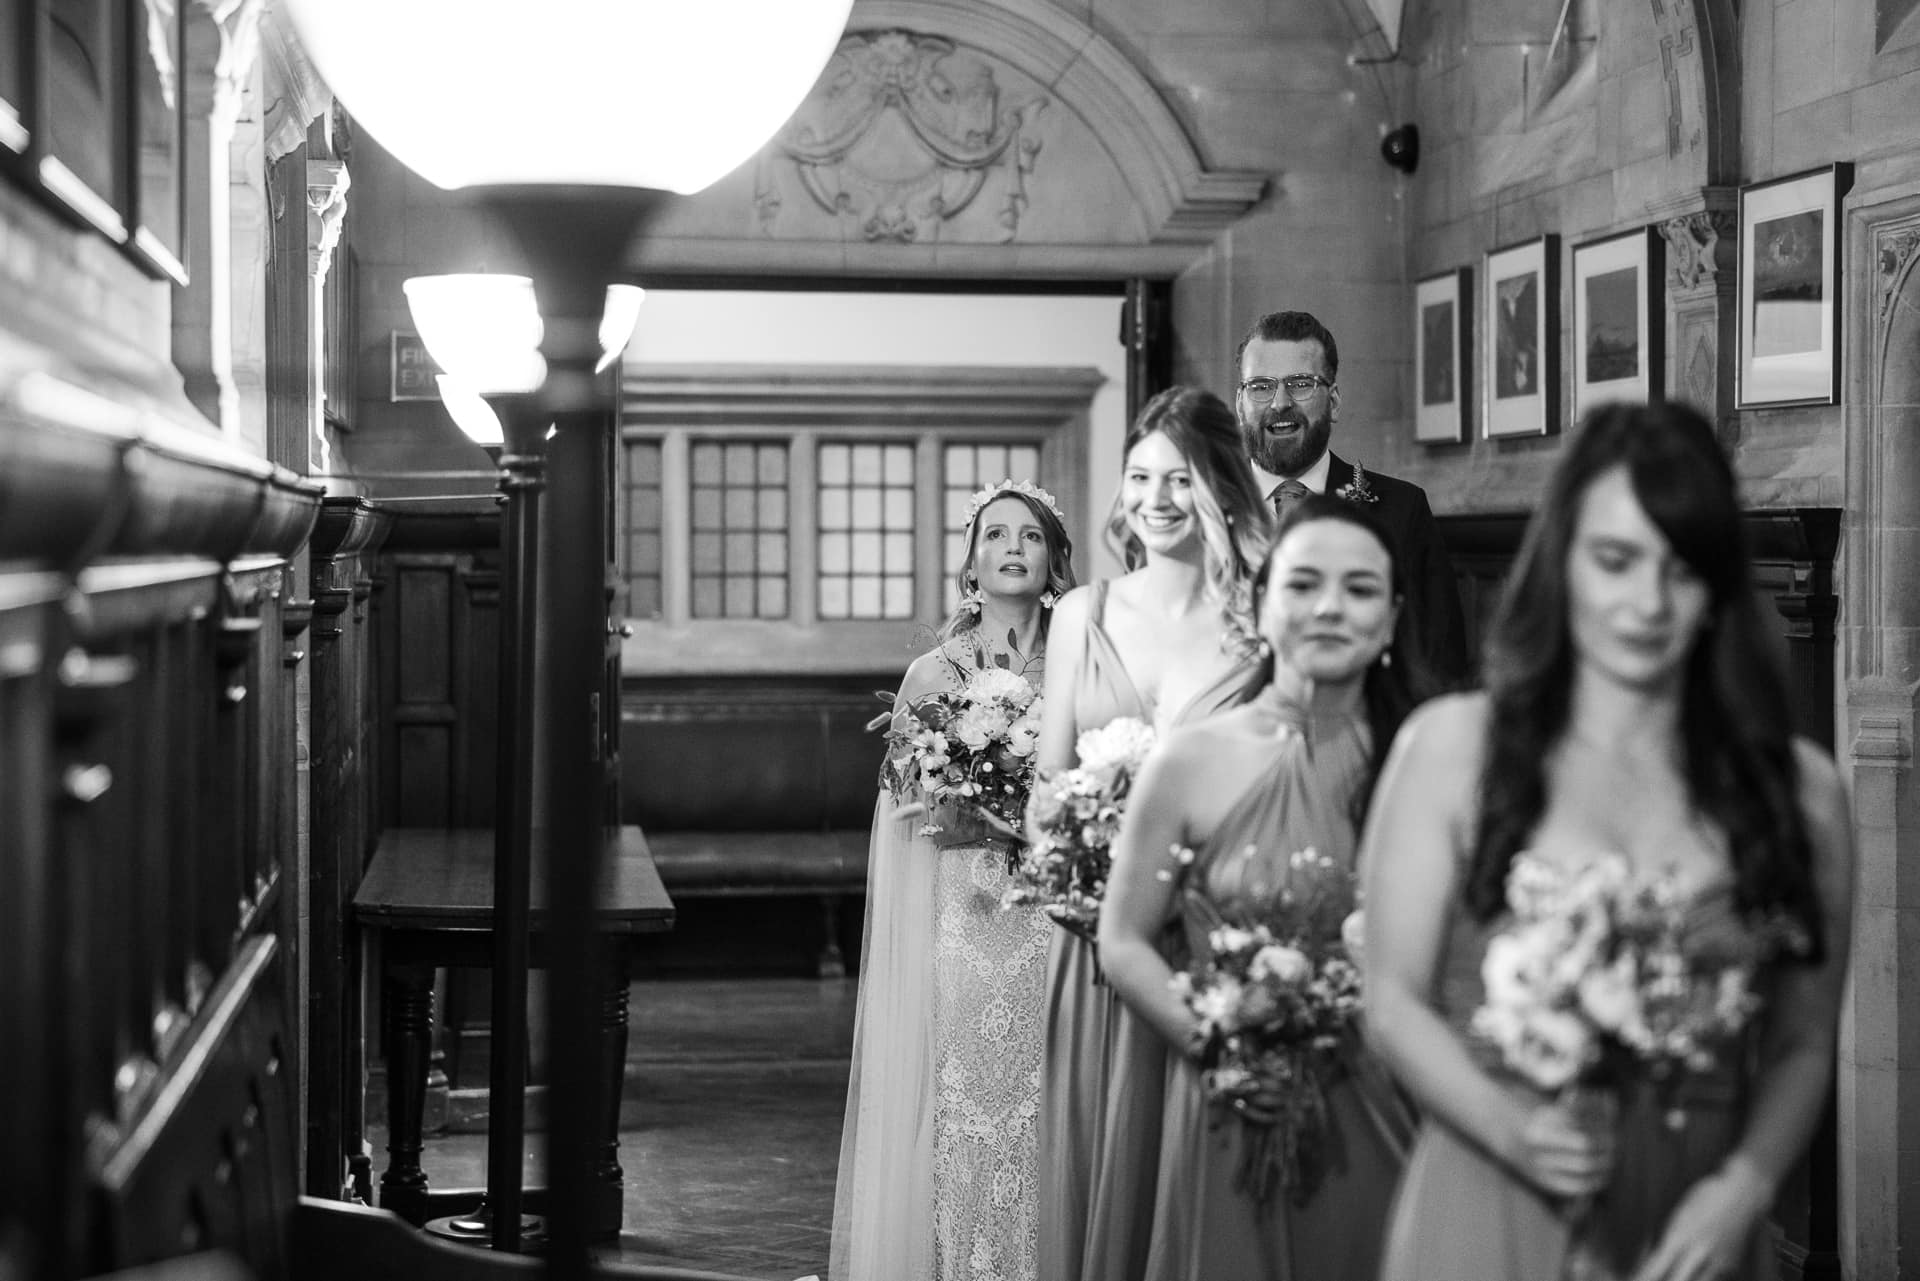 Bride and Bridesmaids waiting to enter the room at Oxfords county hall